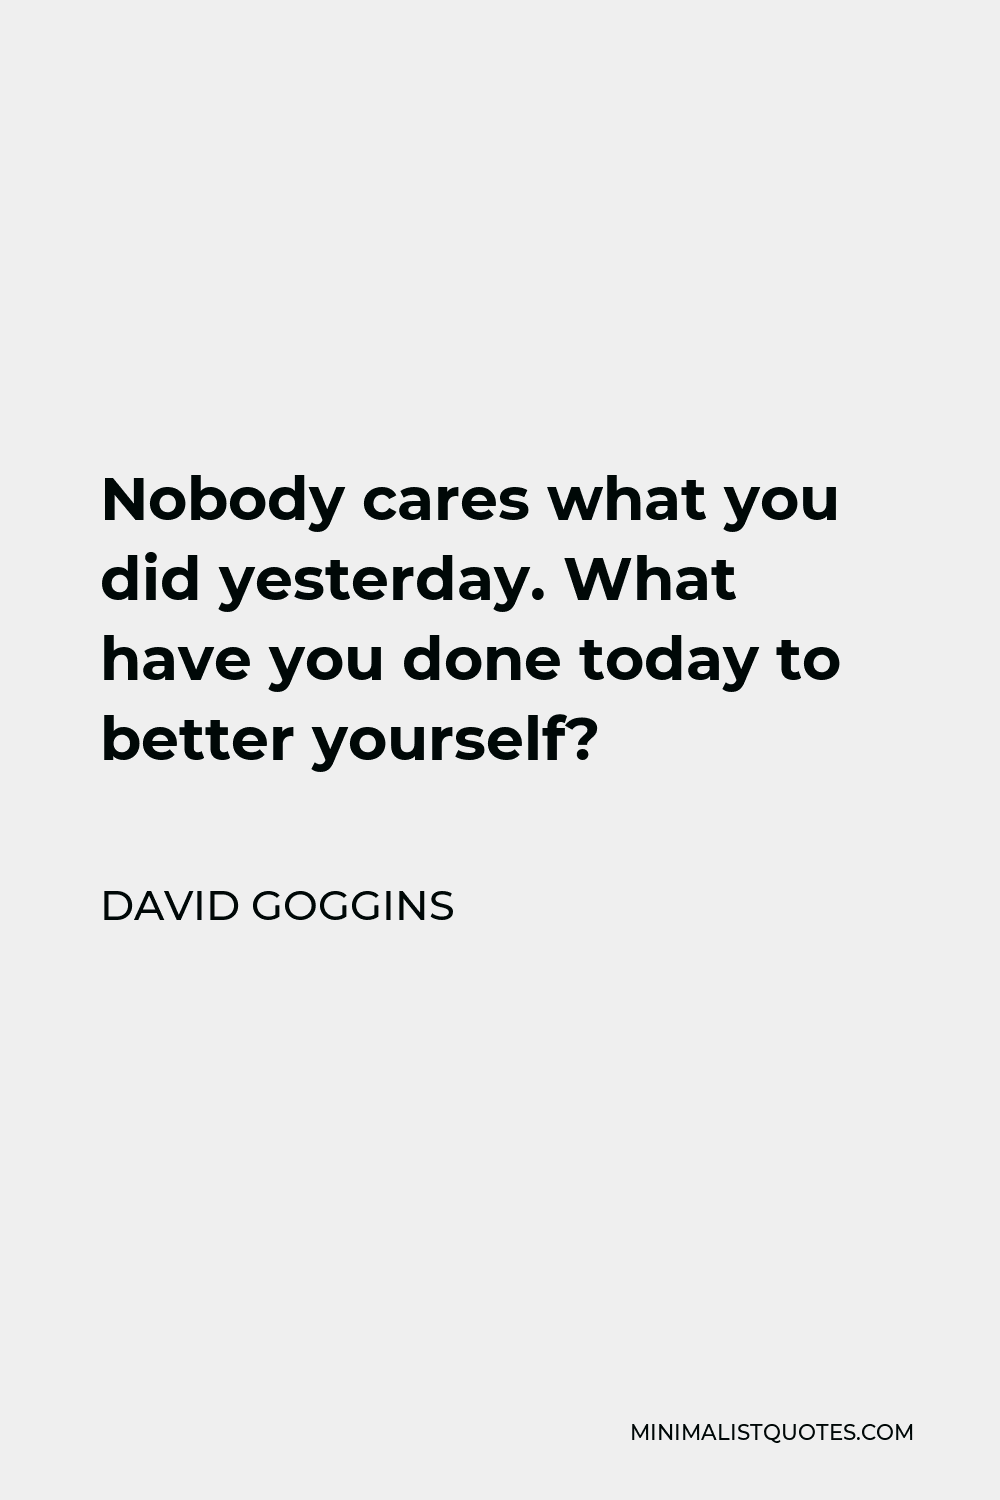 David Goggins Quote: Nobody cares what you did yesterday. What have you  done today to better yourself?